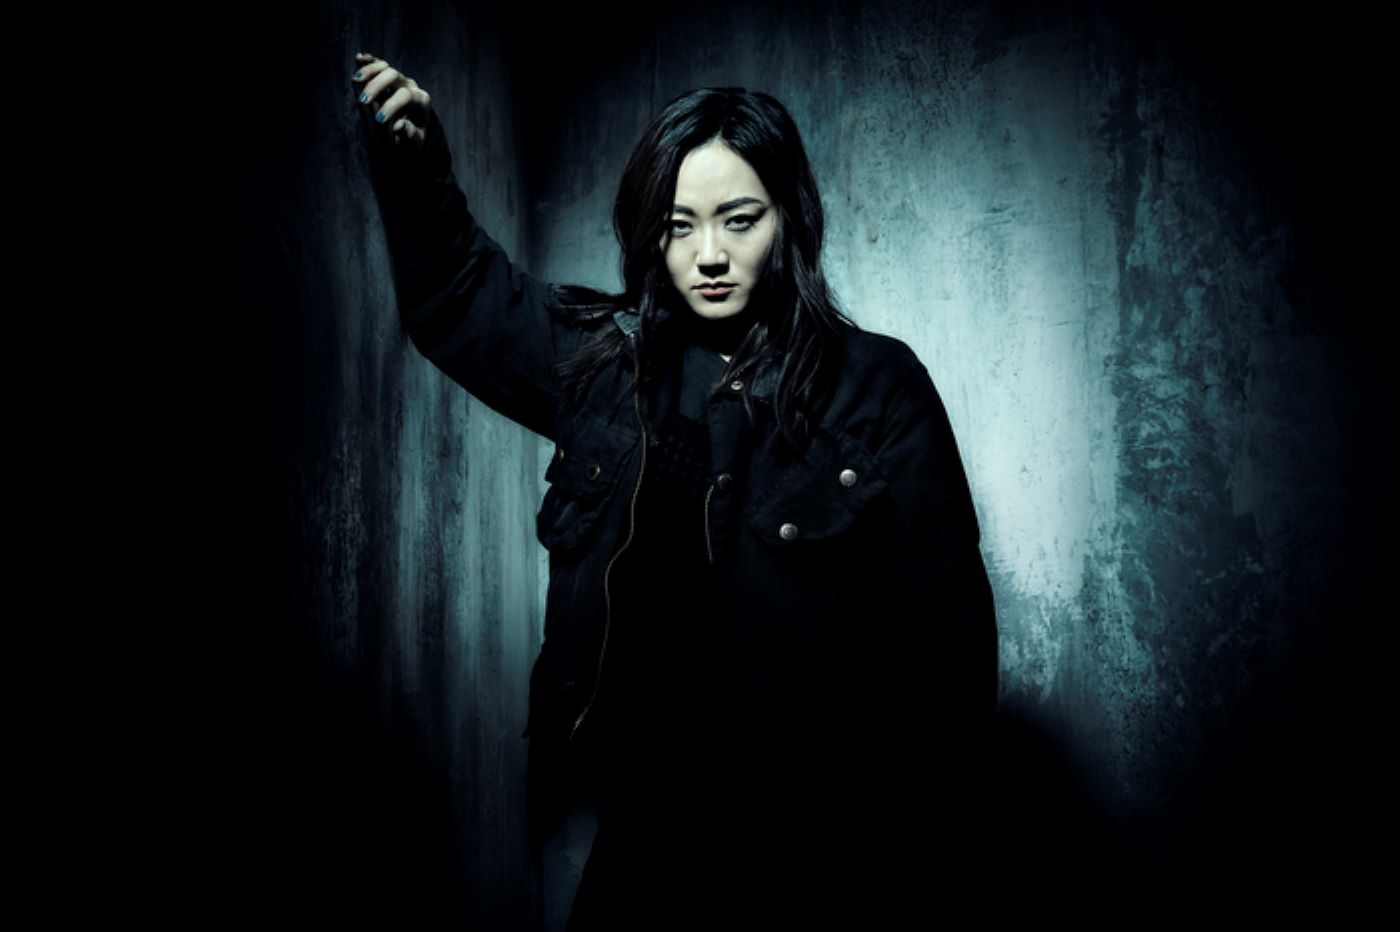 Kimiko from 'The Boys' is wearing a black jacket and pants against a drastic vignette with a grey center.